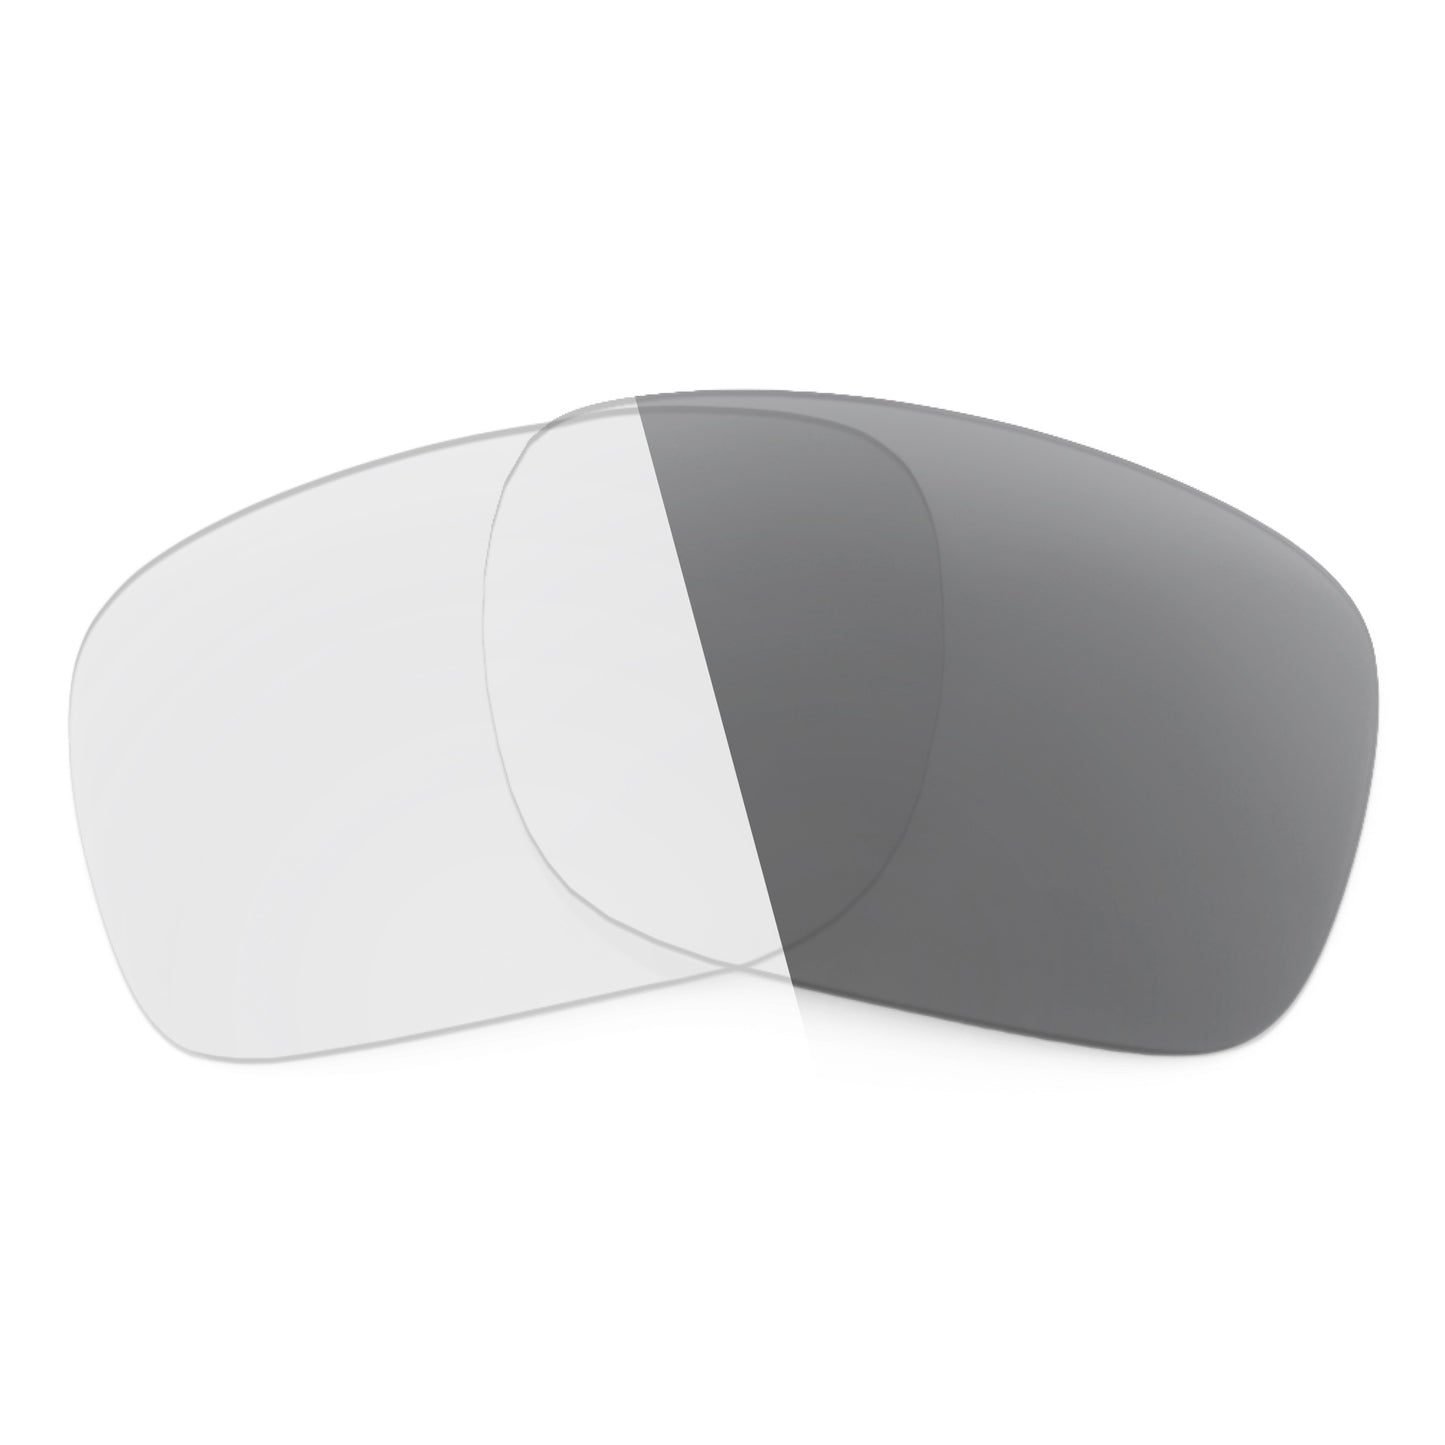 Revant replacement lenses for Ray-Ban New Caravan RB3636 55mm Non-Polarized Adapt Gray Photochromic